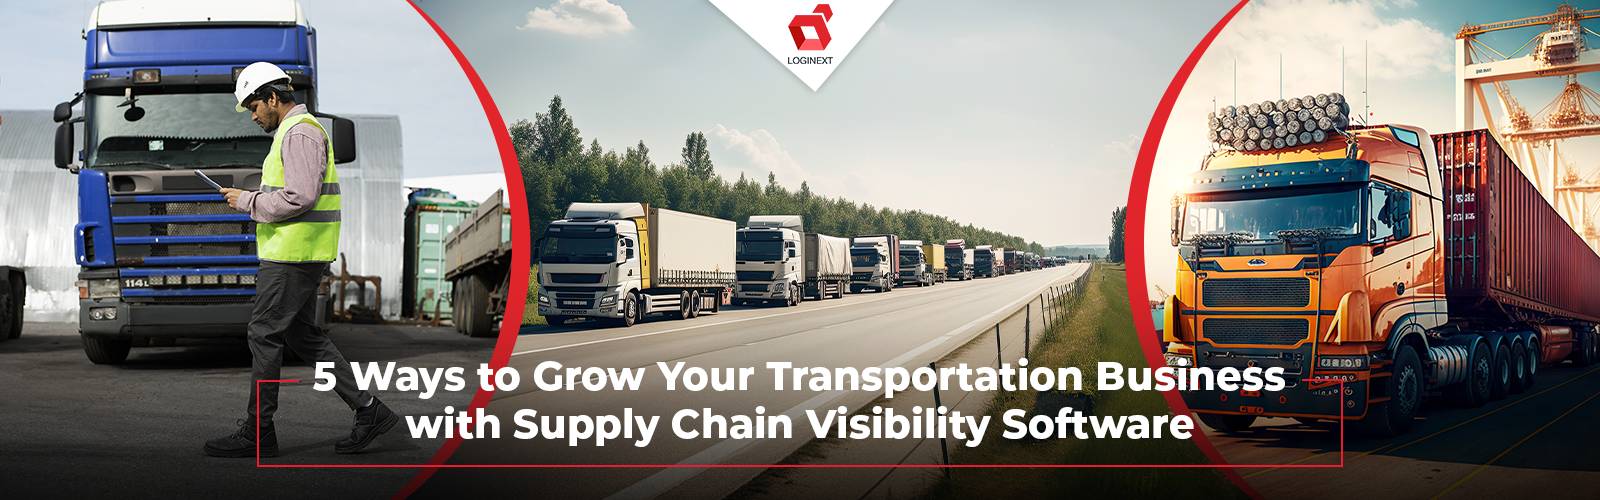 Boost Transport Business With Supply Chain Visibility Software